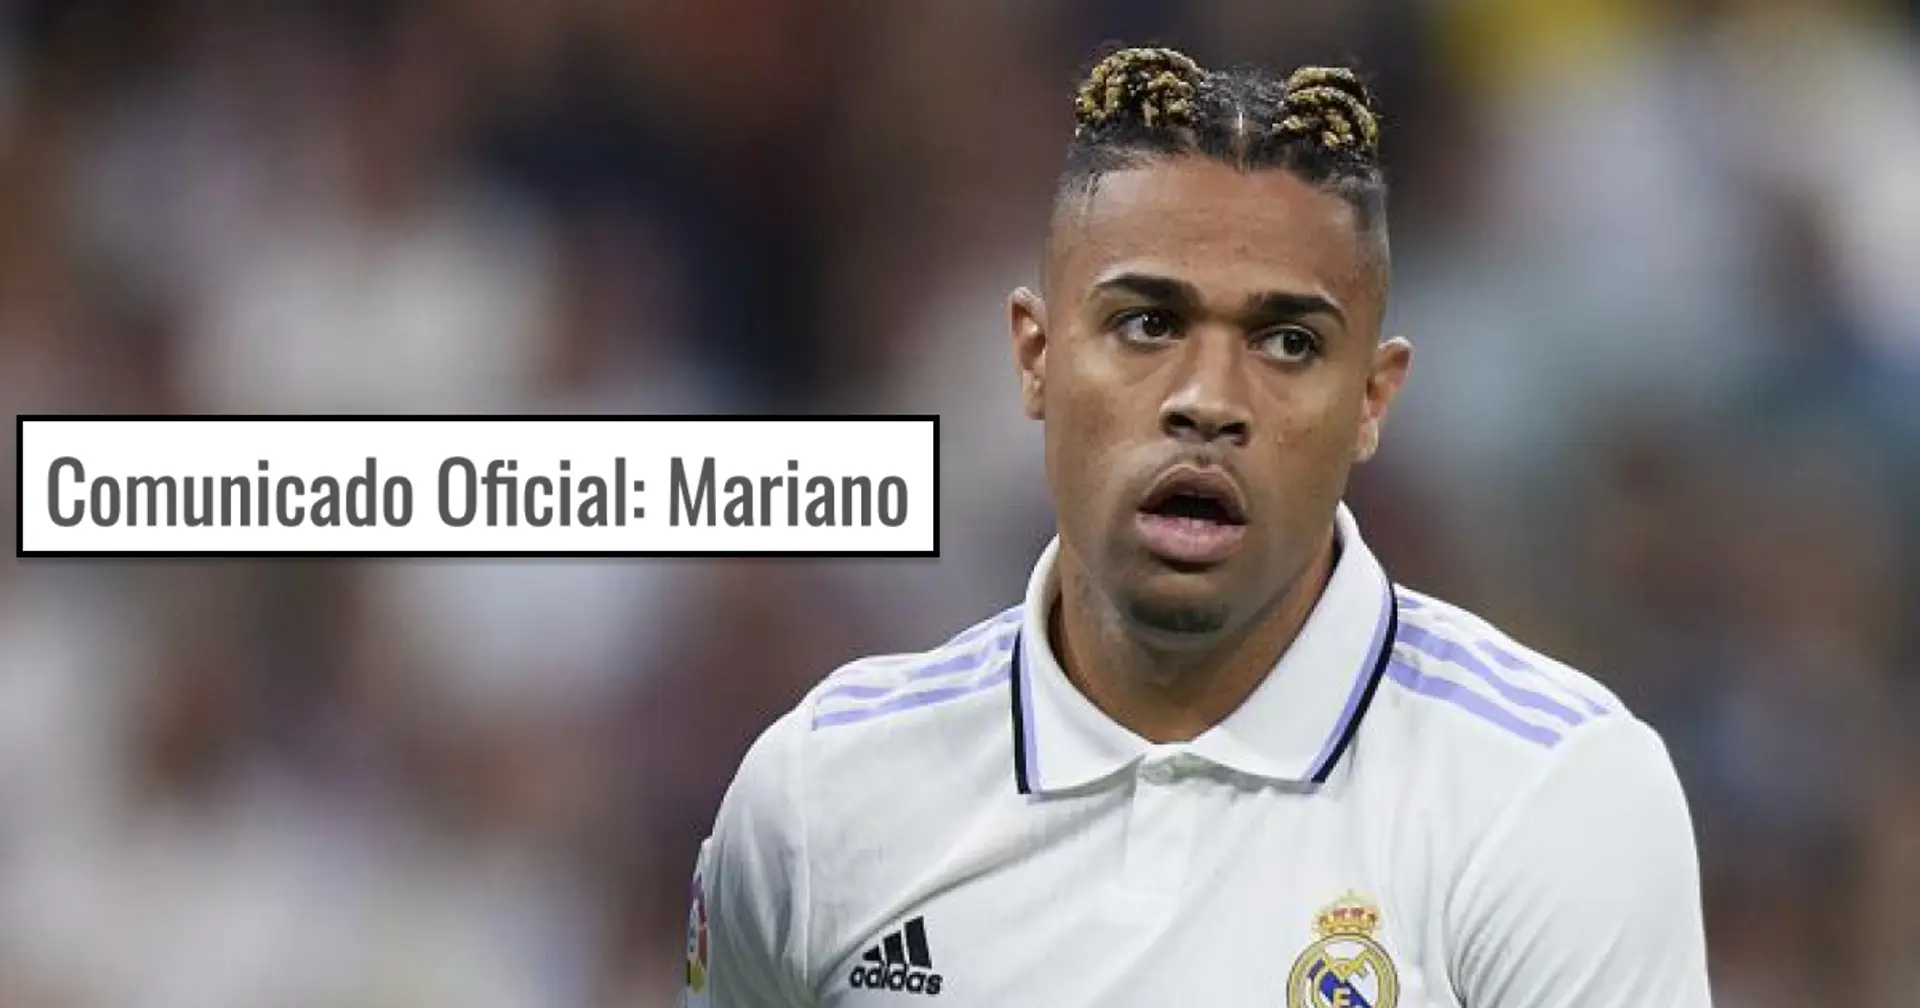 OFFICIAL: Mariano Diaz leaves Real Madrid